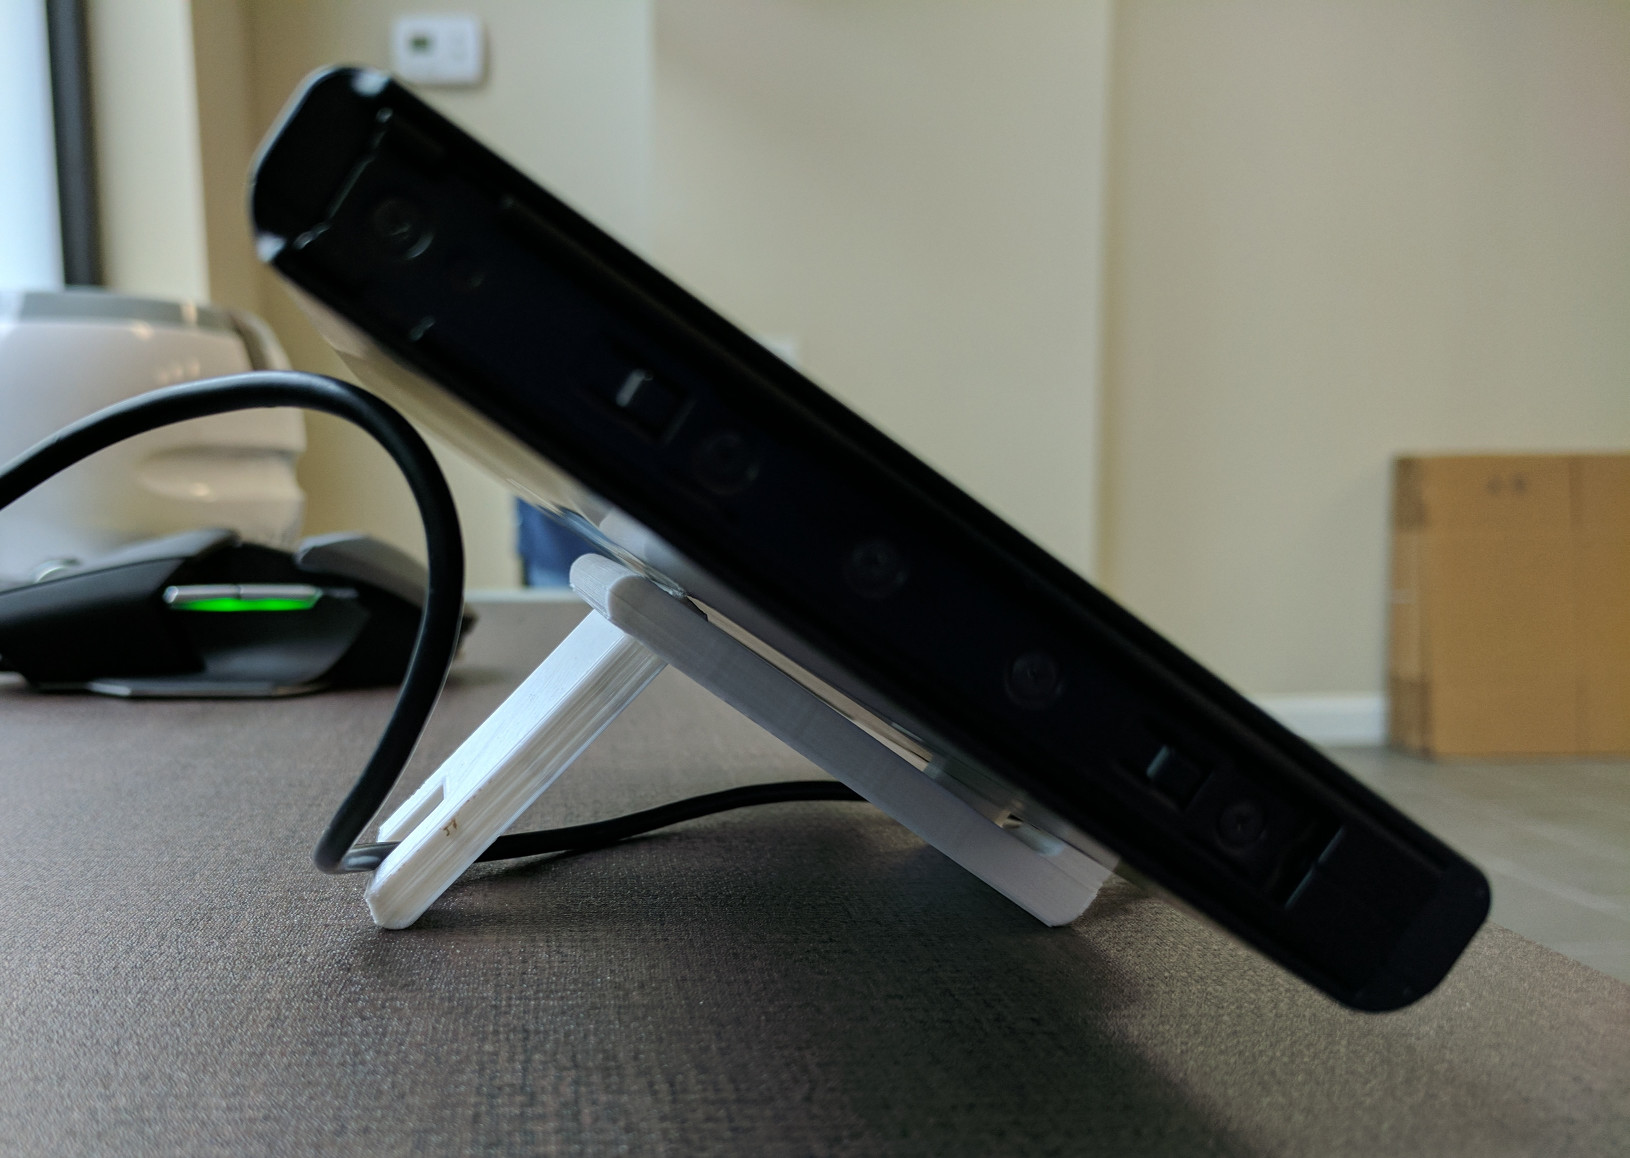 Nintendo Switch Print-in-Place Charging Stand